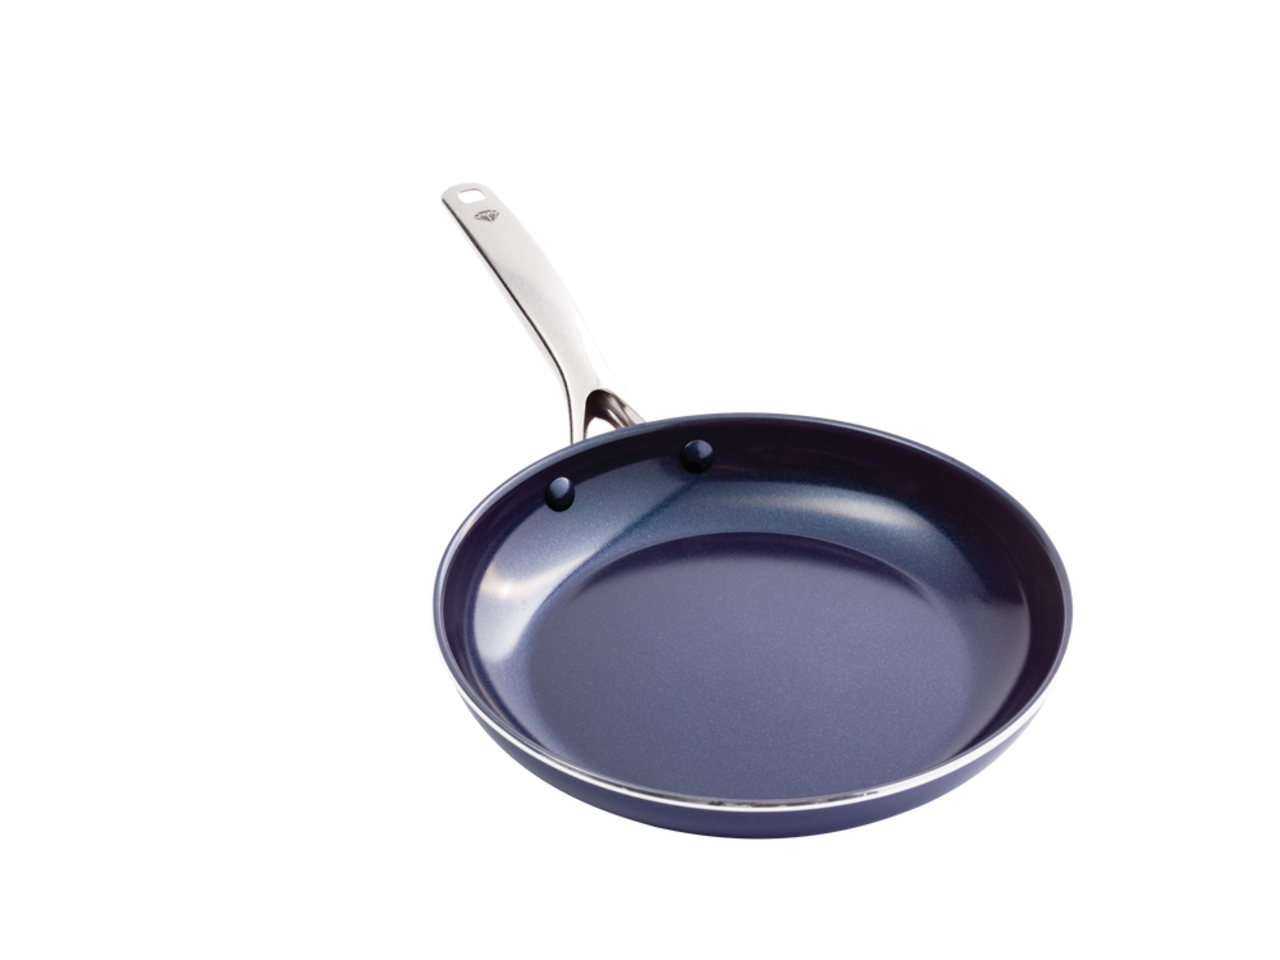 https://media-www.canadiantire.ca/product/living/as-seen-on-tv/asotv/3993325/asotv-blue-diamond-12-fry-pan-90a0f31d-886f-407a-a41f-c01ee78d1434.png?imdensity=1&imwidth=640&impolicy=mZoom